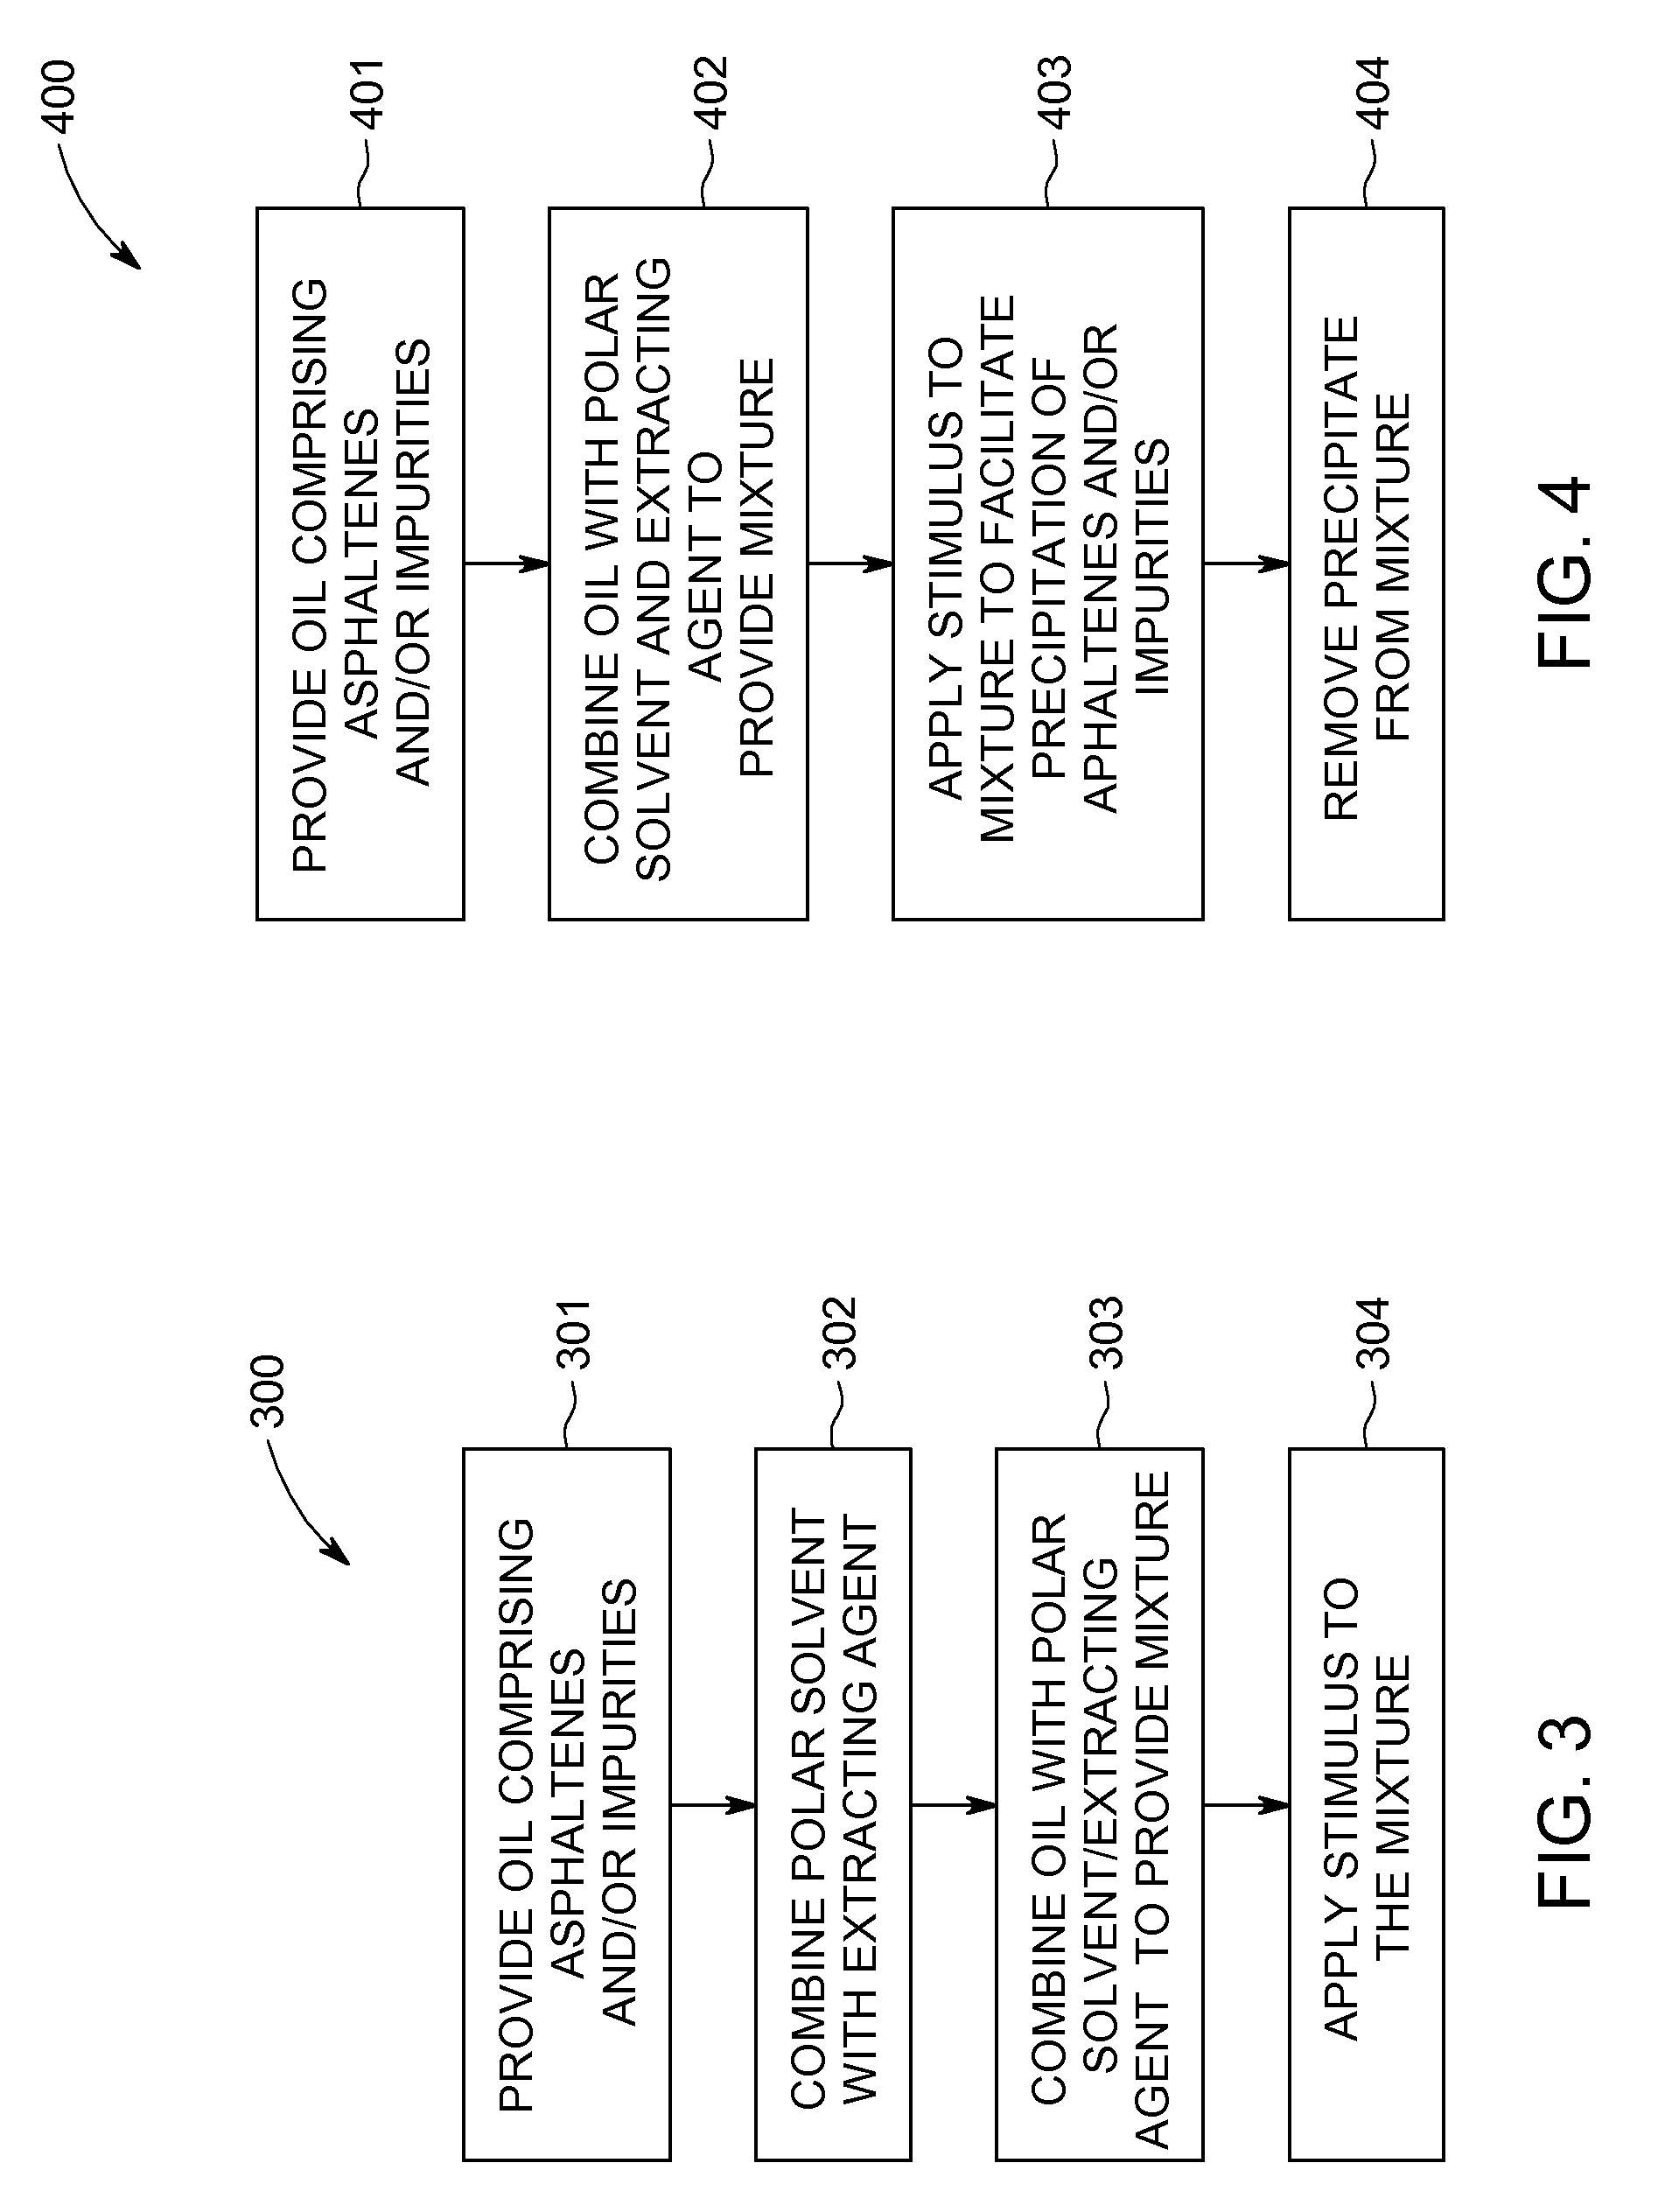 Method for deasphalting and extracting hydrocarbon oils